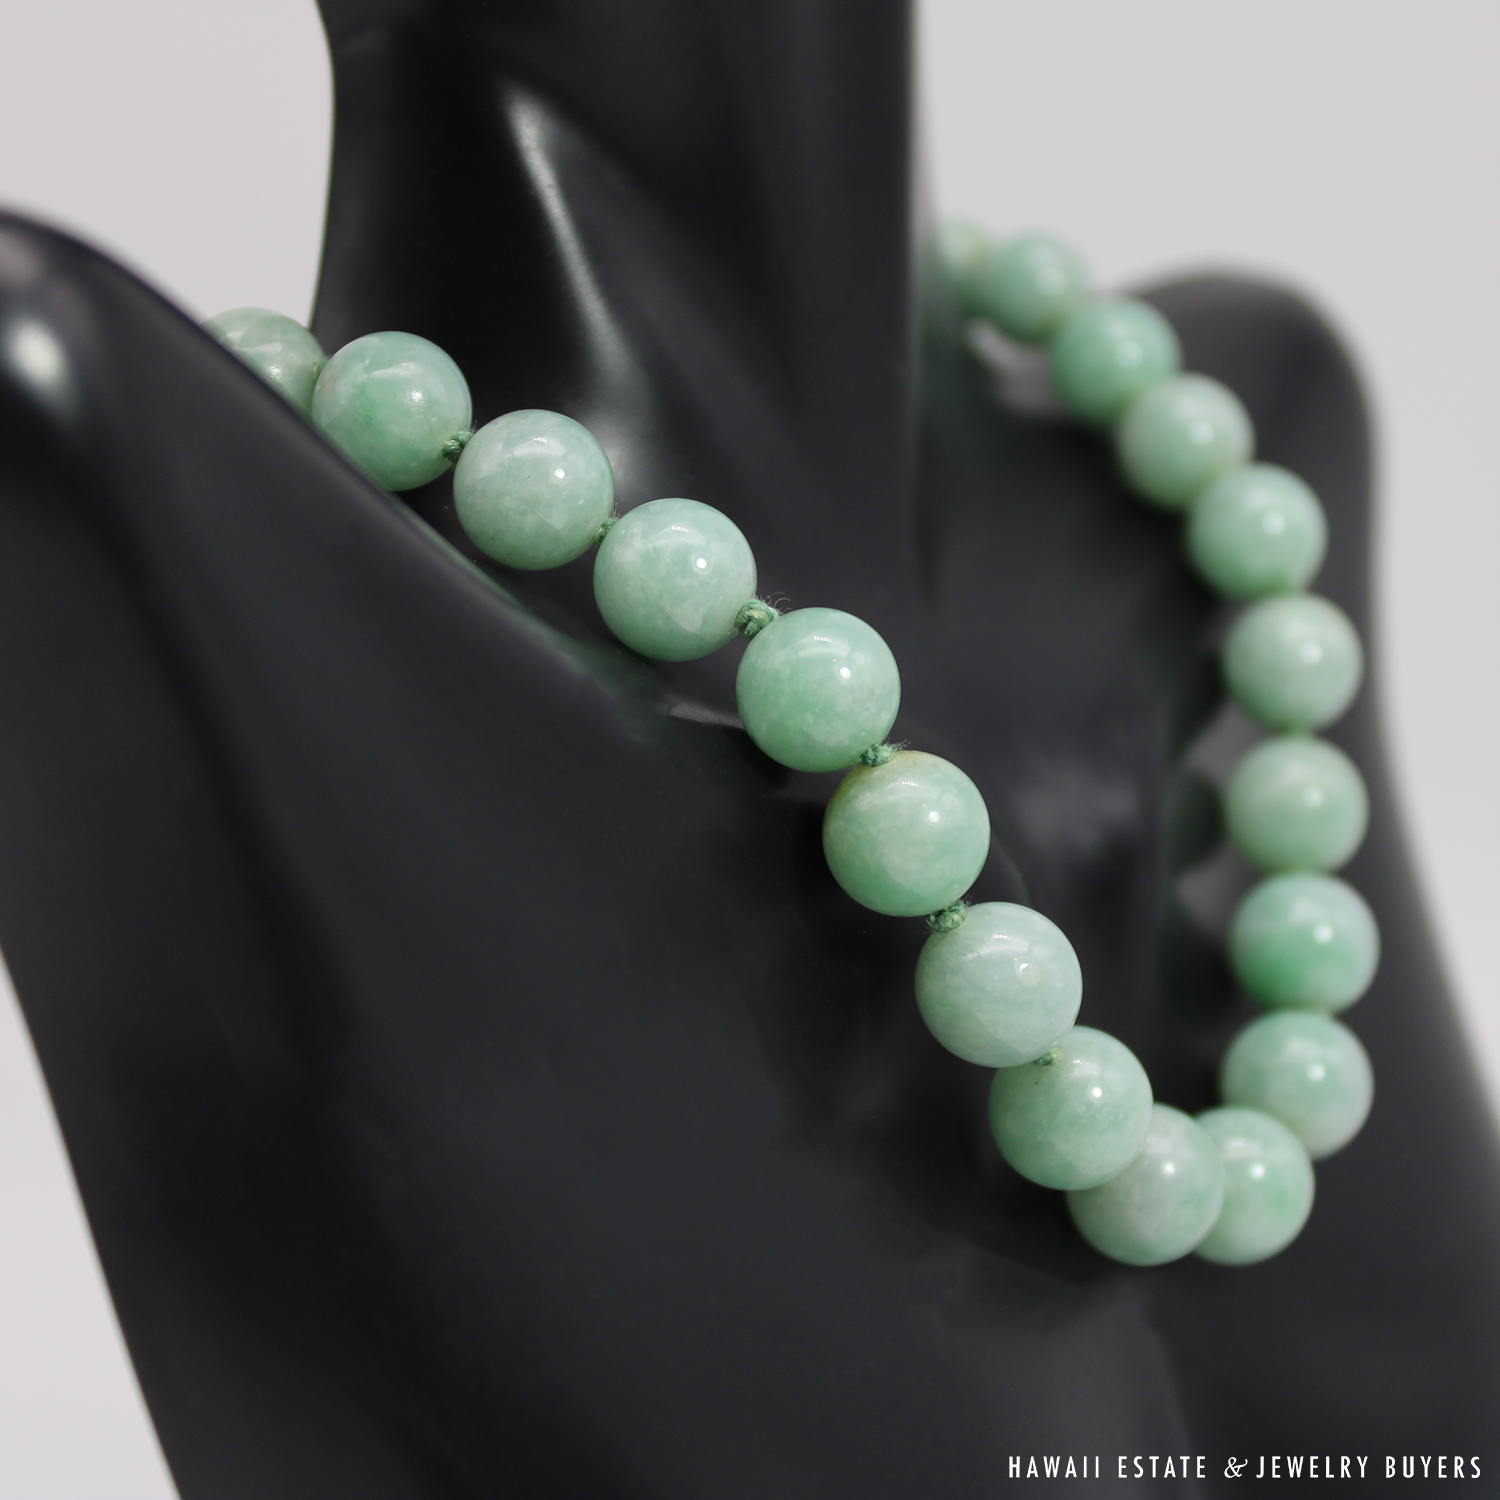 MING'S 64.8g 14KYG GRADUATED LIGHT GREEN JADE BEAD KNOTTED NECKLACE 16 INCH  - Hawaii Estate & Jewelry Buyers